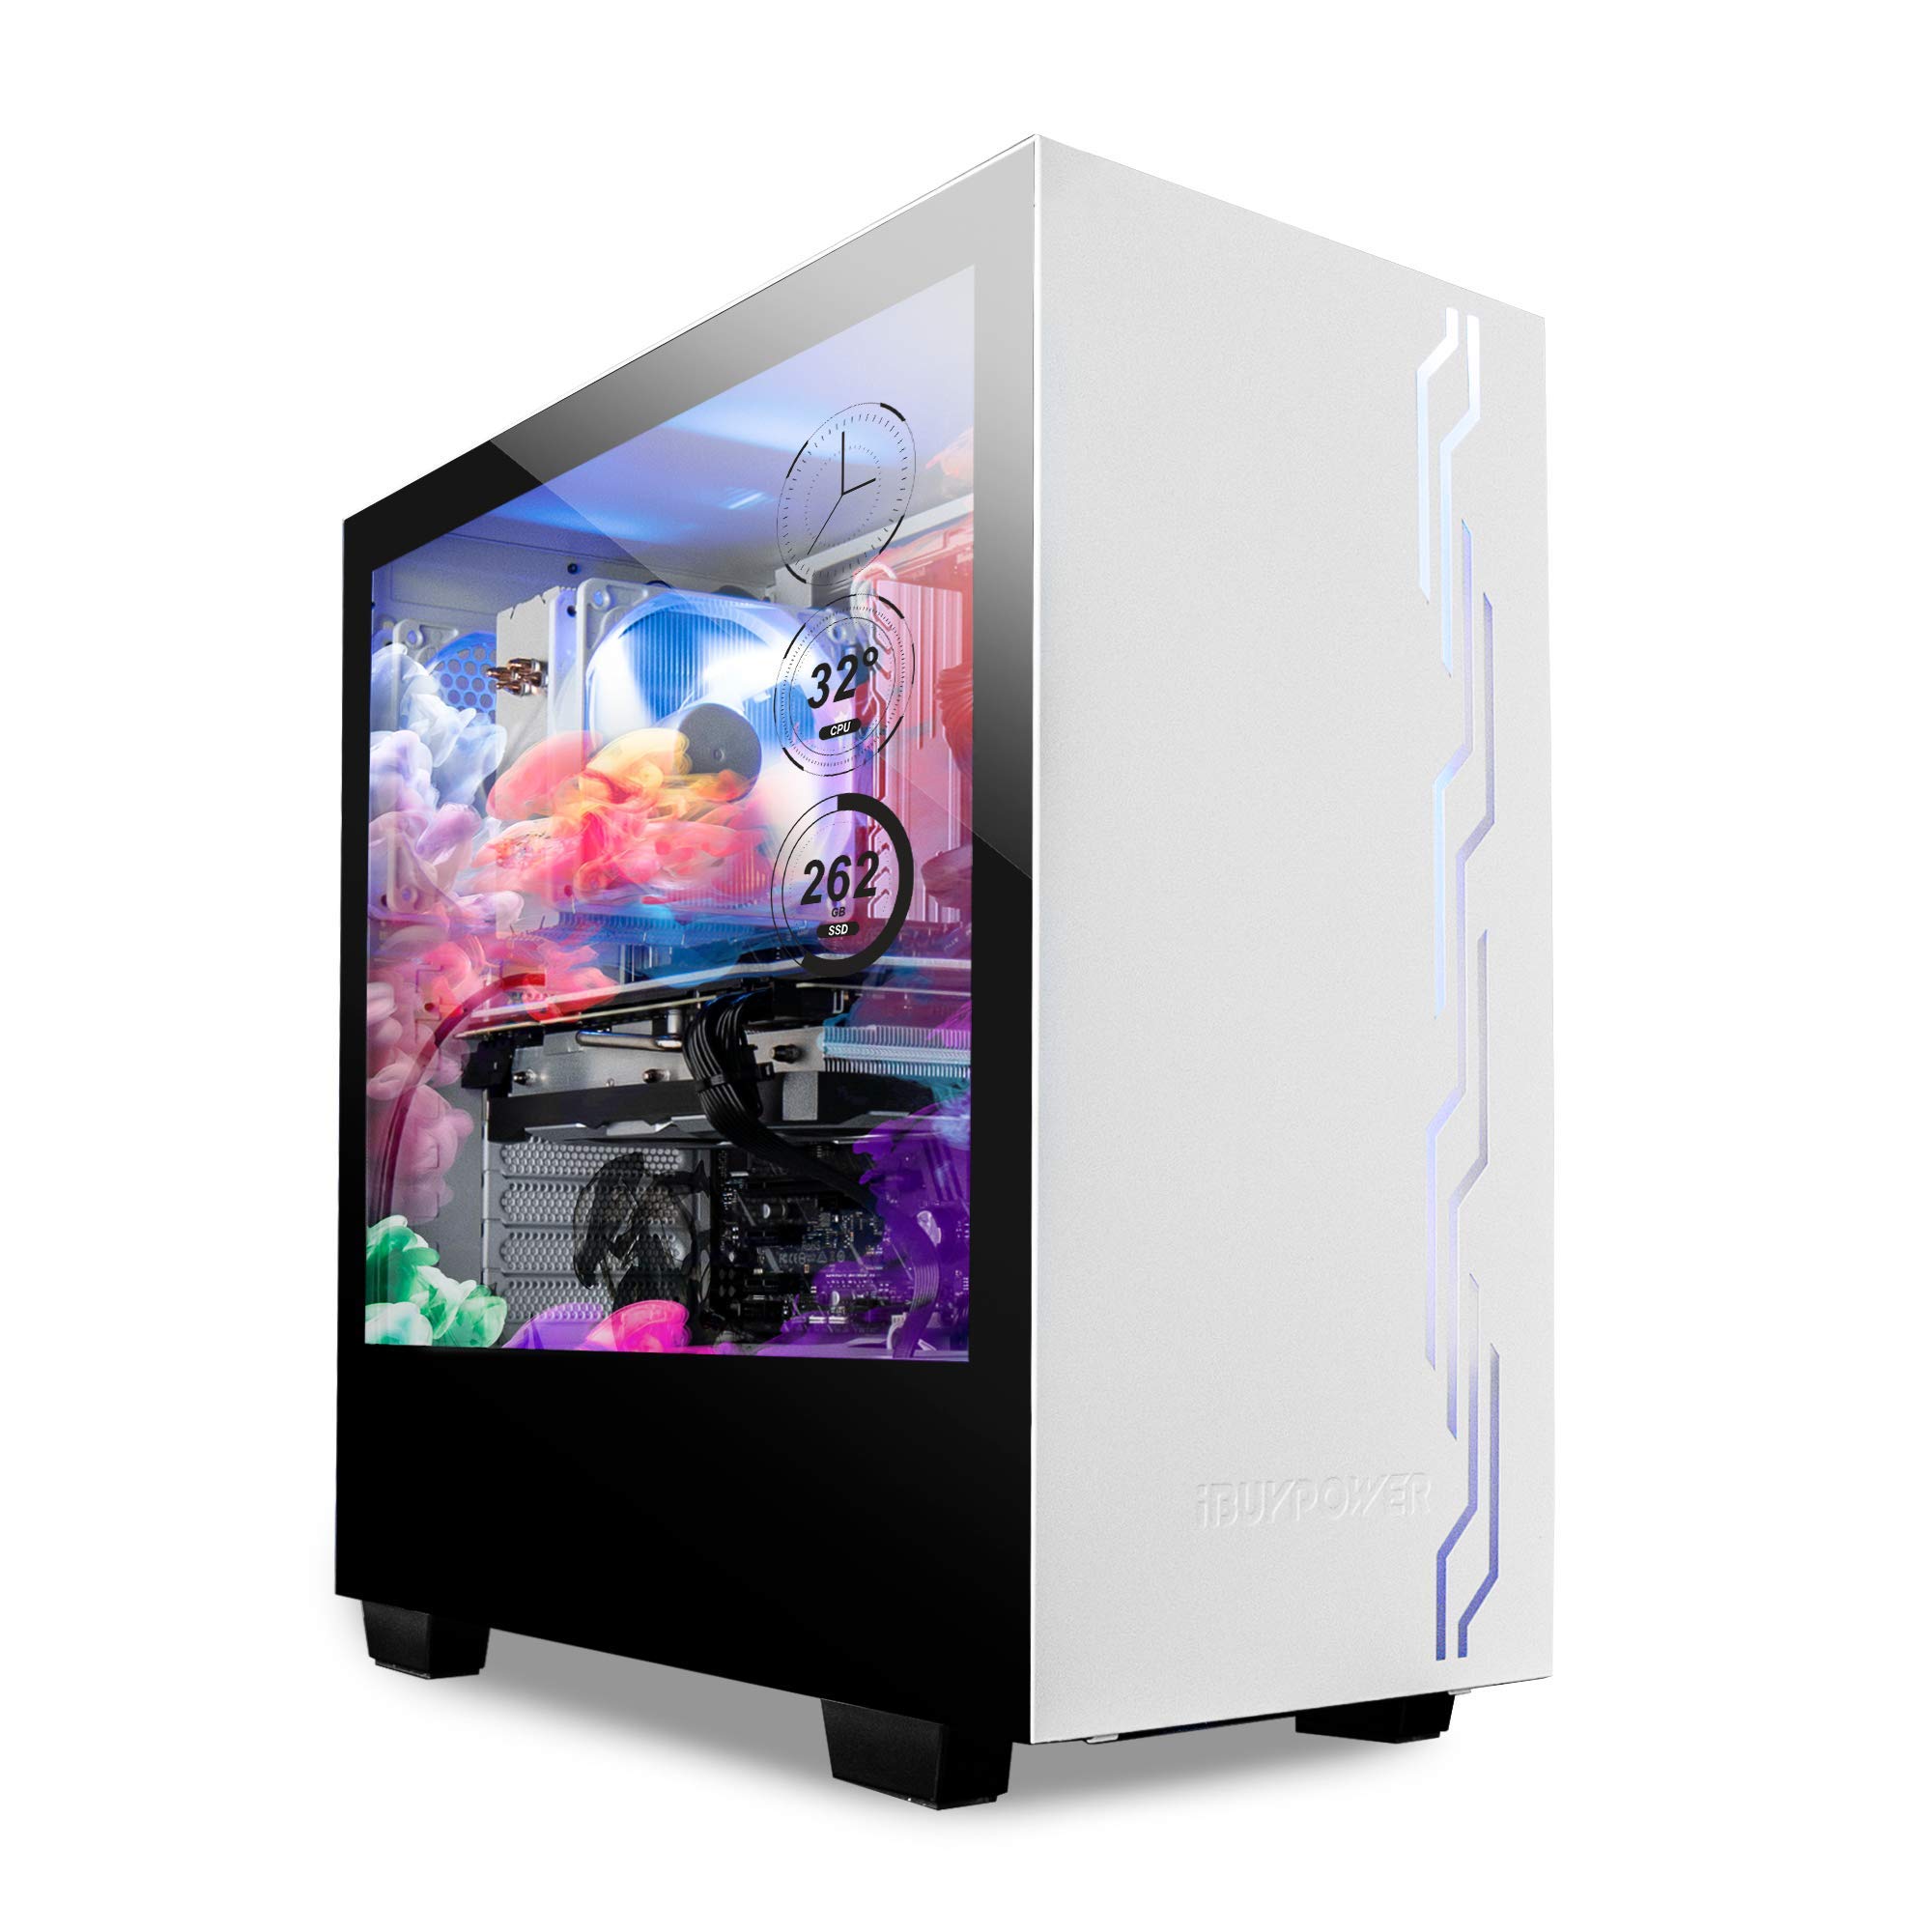 iBUYPOWER Snowblind S 19" Translucent Customizable Side-Panel LCD Display 1280 x 1024 Resolution Mid-Tower Desktop Computer Gaming Case 3 x 120 Millimeter Fans SECC Steel, White